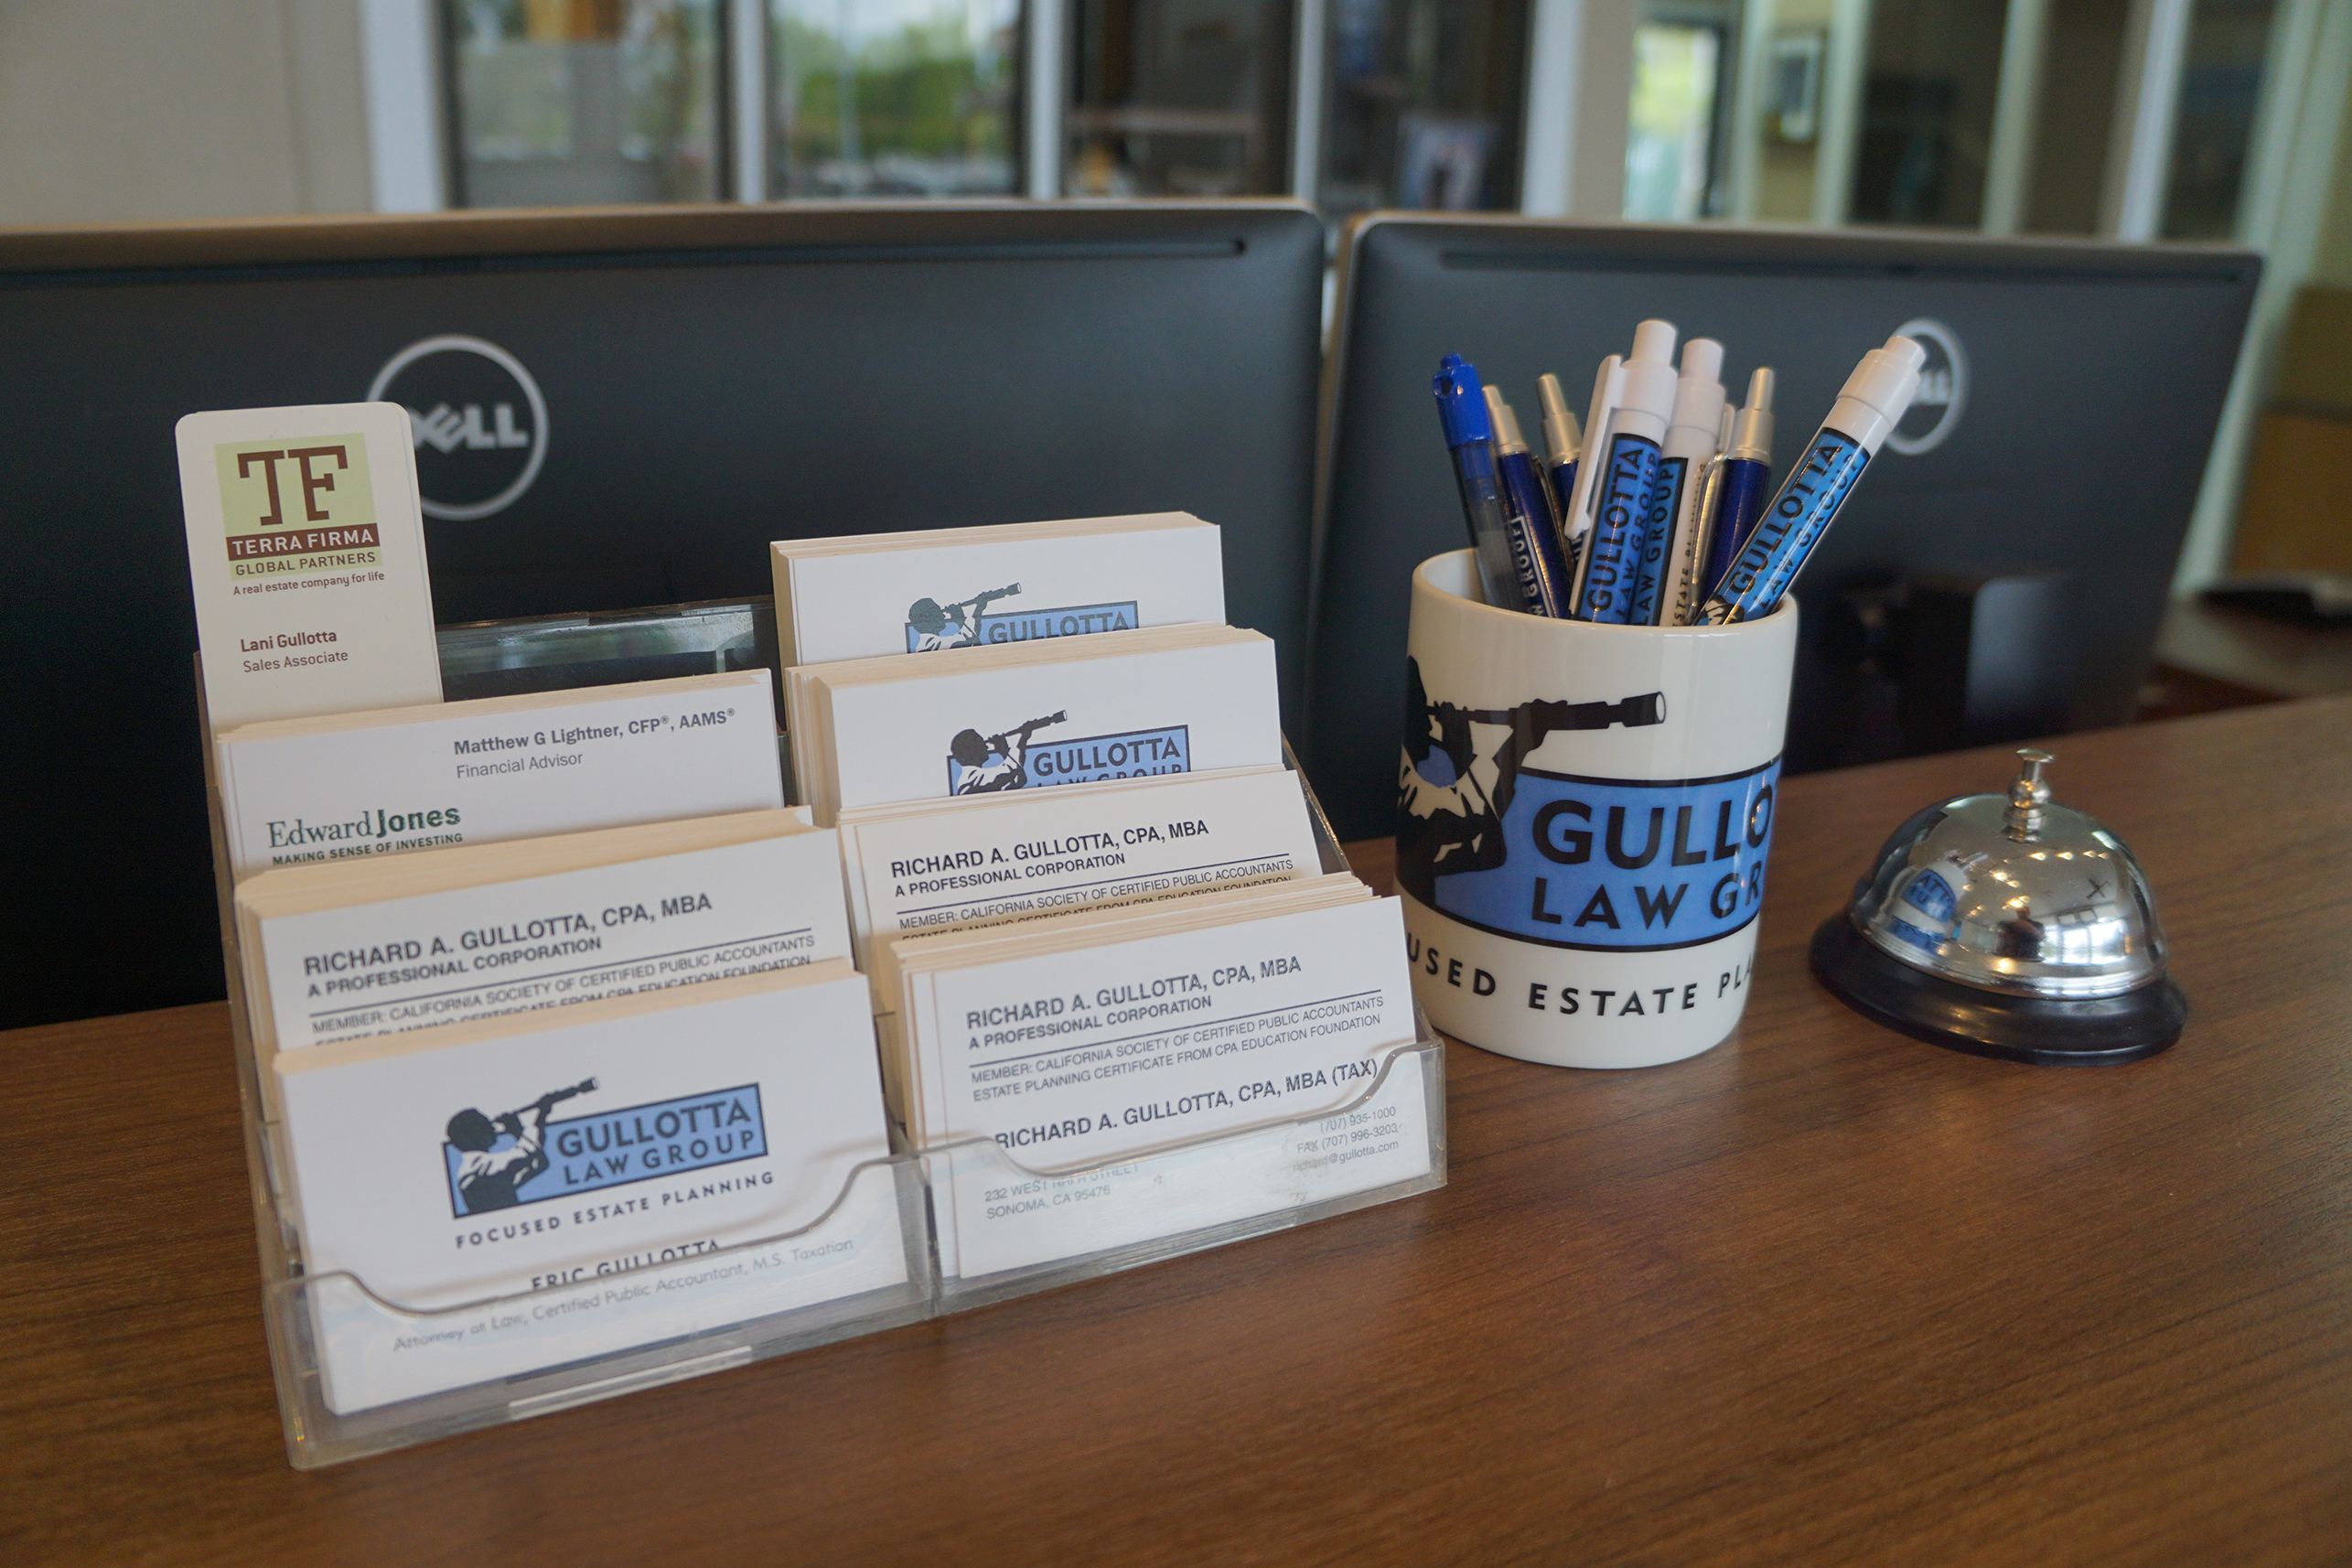 Gullotta Law Group Receptionist Desk and Business Cards